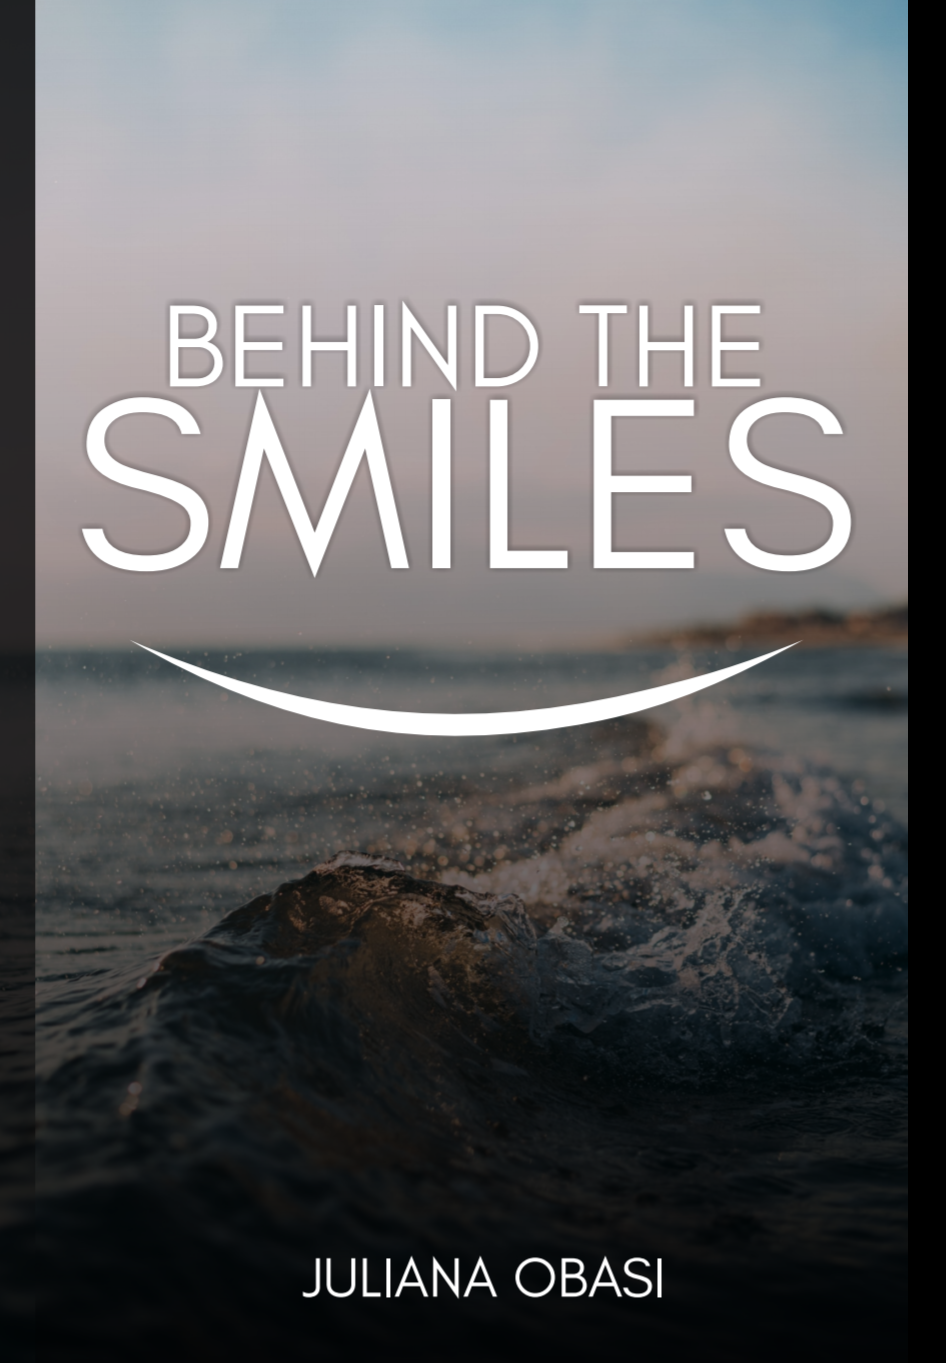 Behind-the-Smiles